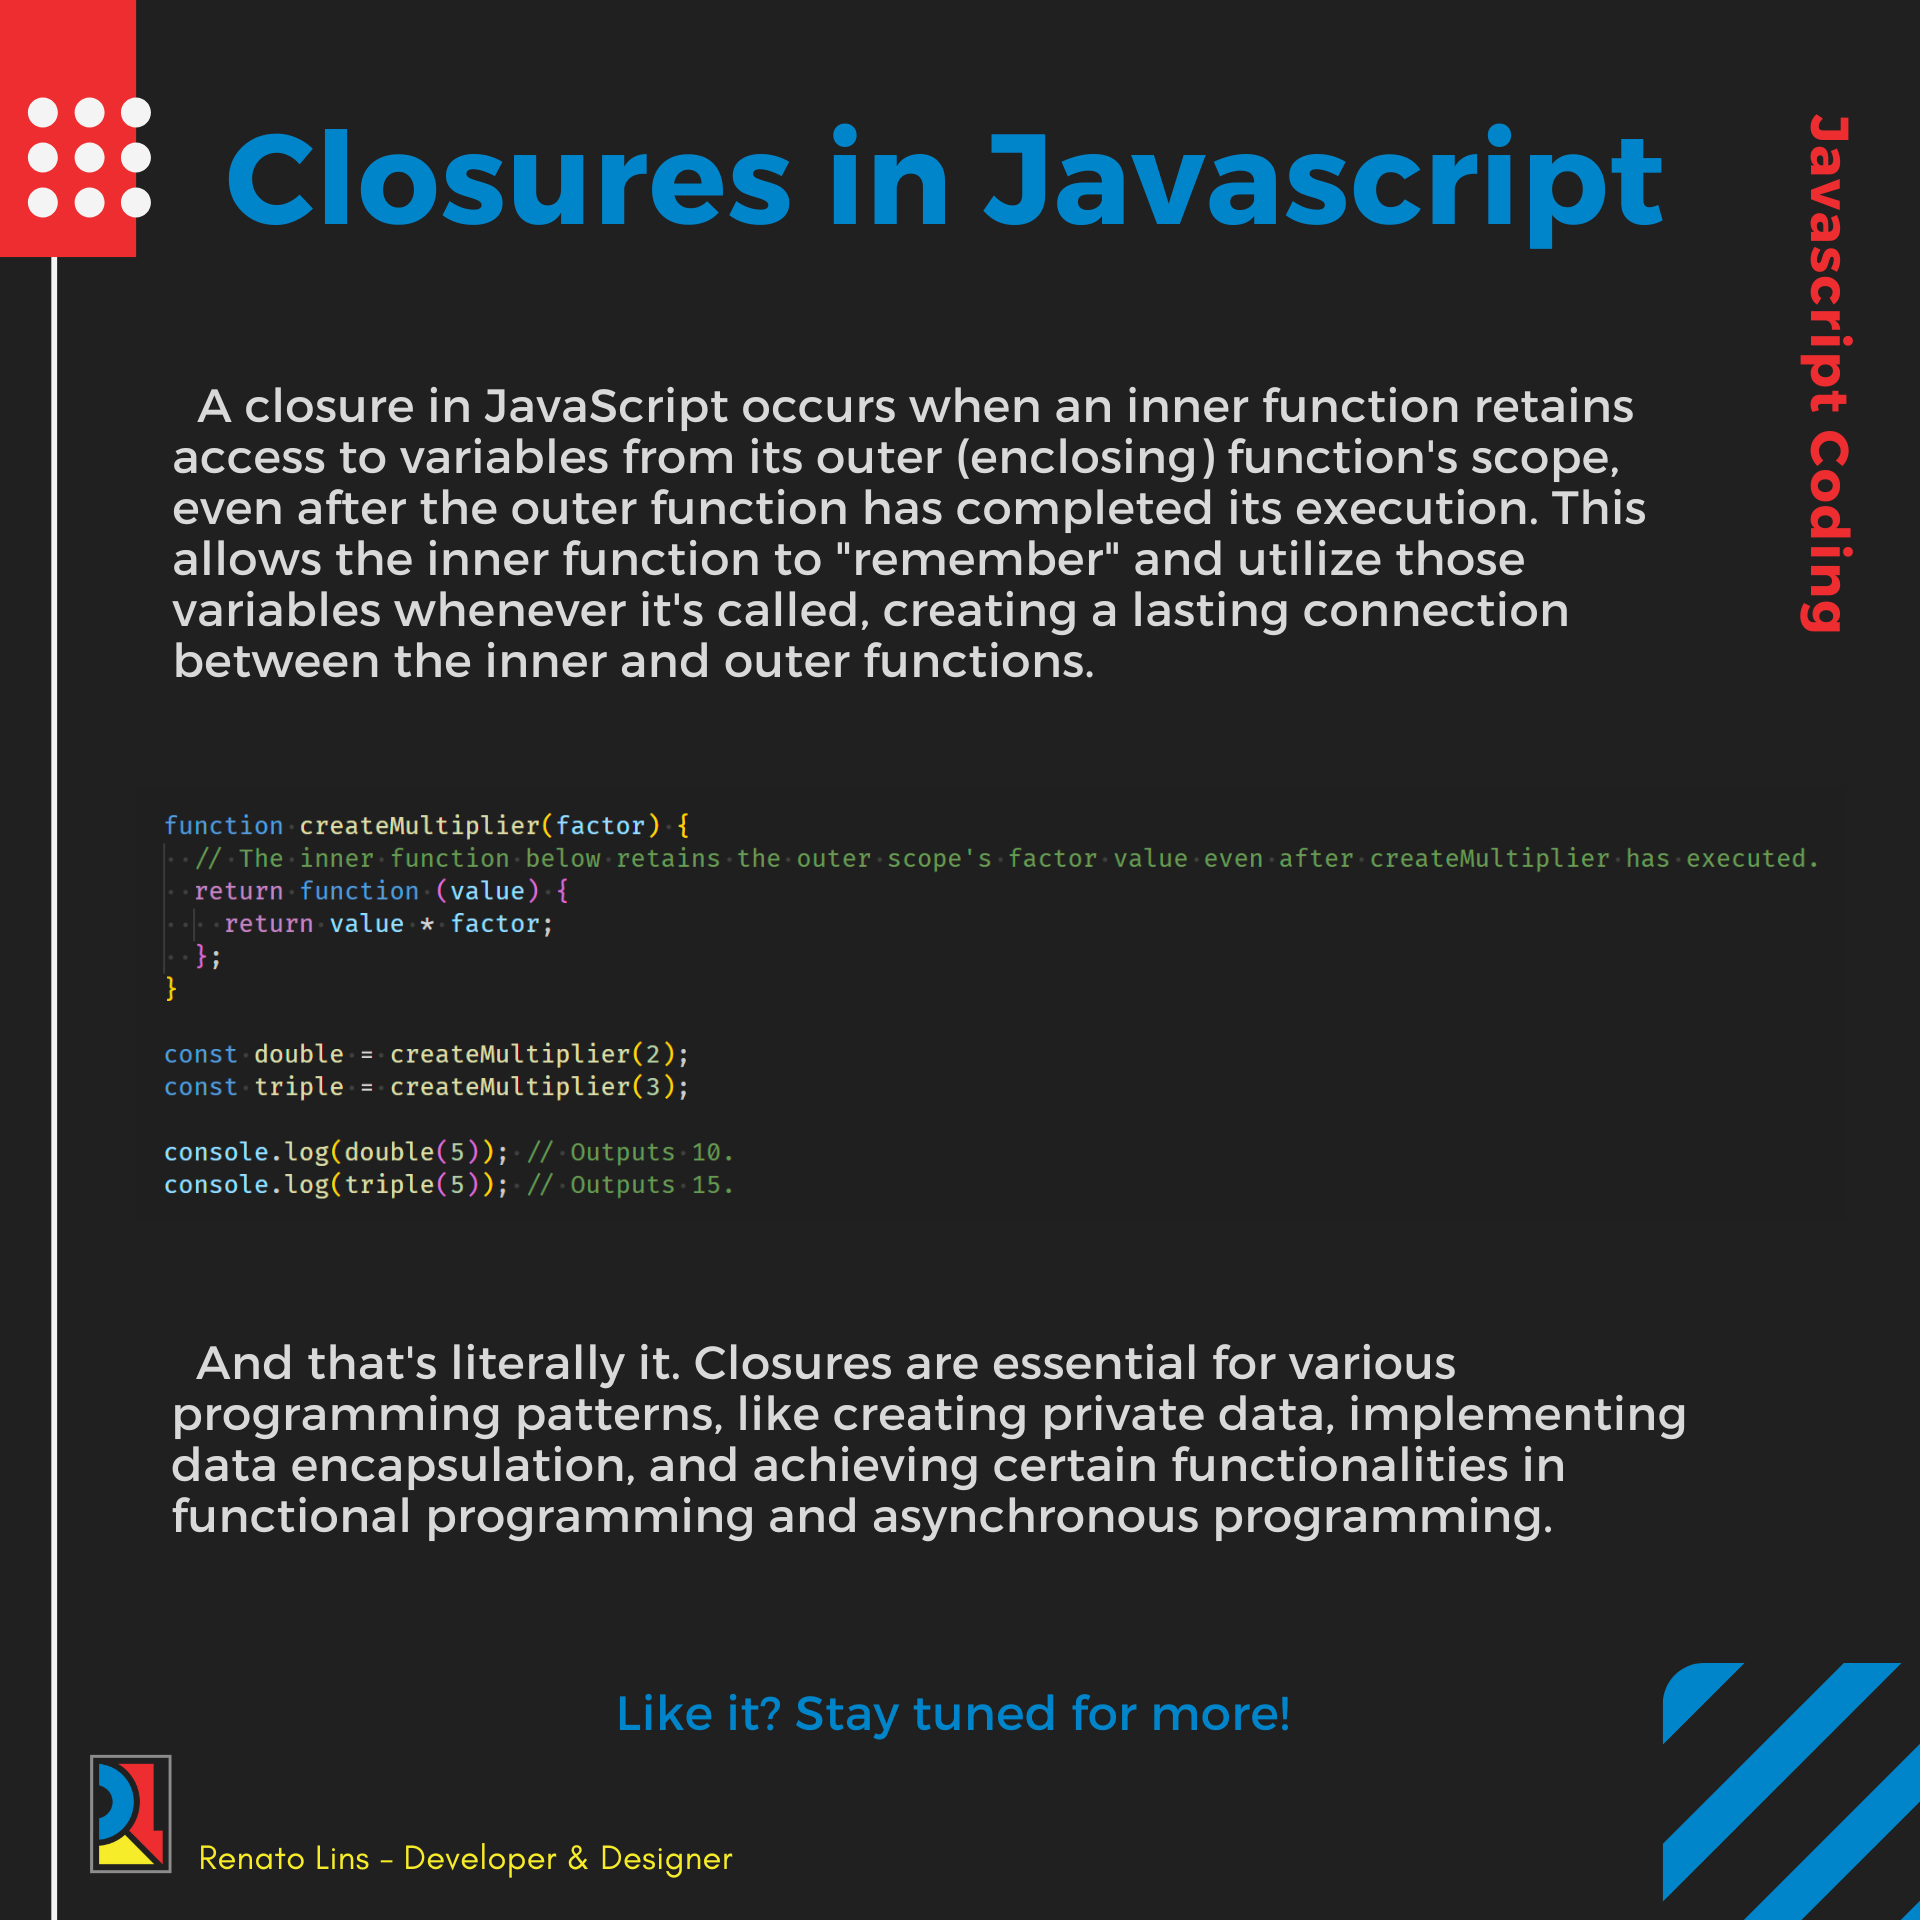 A closure in JavaScript occurs when an inner function retains
access to variables from its outer (enclosing) function's scope,
even after the outer function has completed its execution. This
allows the inner function to "remember" and utilize those
variables whenever it's called, creating a lasting connection
between the inner and outer functions.

function createMultiplier(factor) {

The inner function: below retair the outer cope factor value -even-after createMultiplier has executed.

return function (value) {
return value * factor;
IH

}

createMultiplier(2);
createMultiplier(3);

const double
const triple

console.log(double(5)); Outputs 10
console.log(triple(5)); ITT!

And that's literally it. Closures are essential for various
programming patterns, like creating private data, implementing
data encapsulation, and achieving certain functionalities in
functional programming and asynchronous programming.

Rl Renato Lins - Developer & Designer